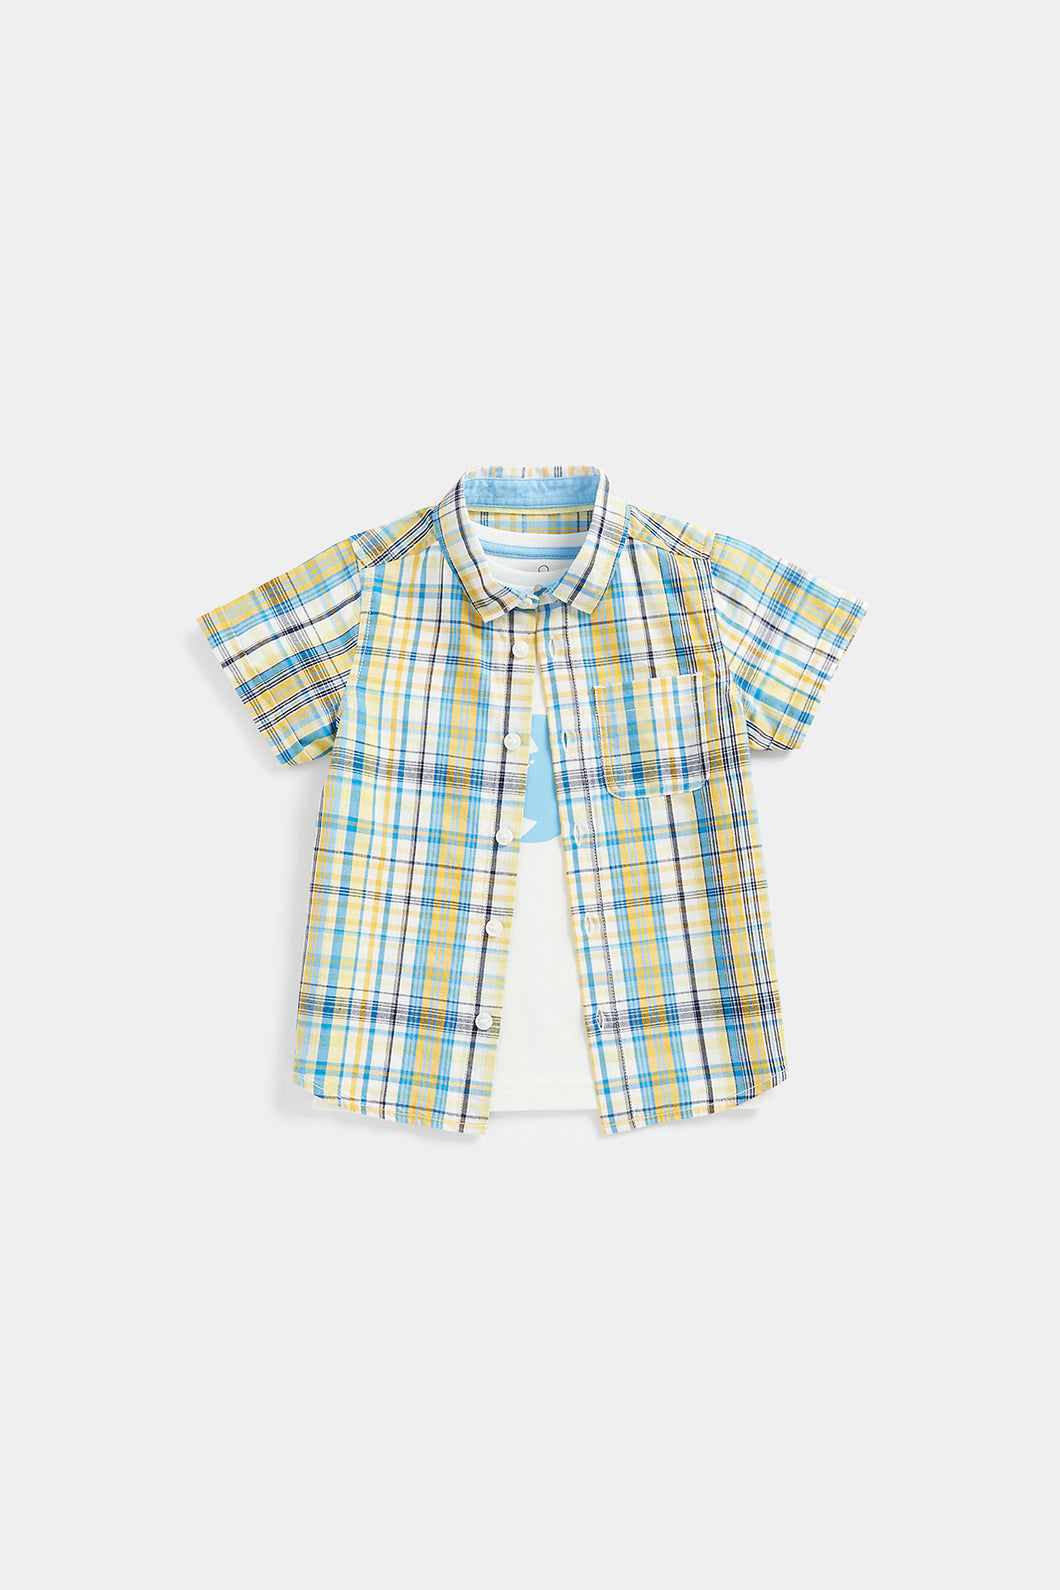 Mothercare Checked Shirt and Whale T-Shirt Set